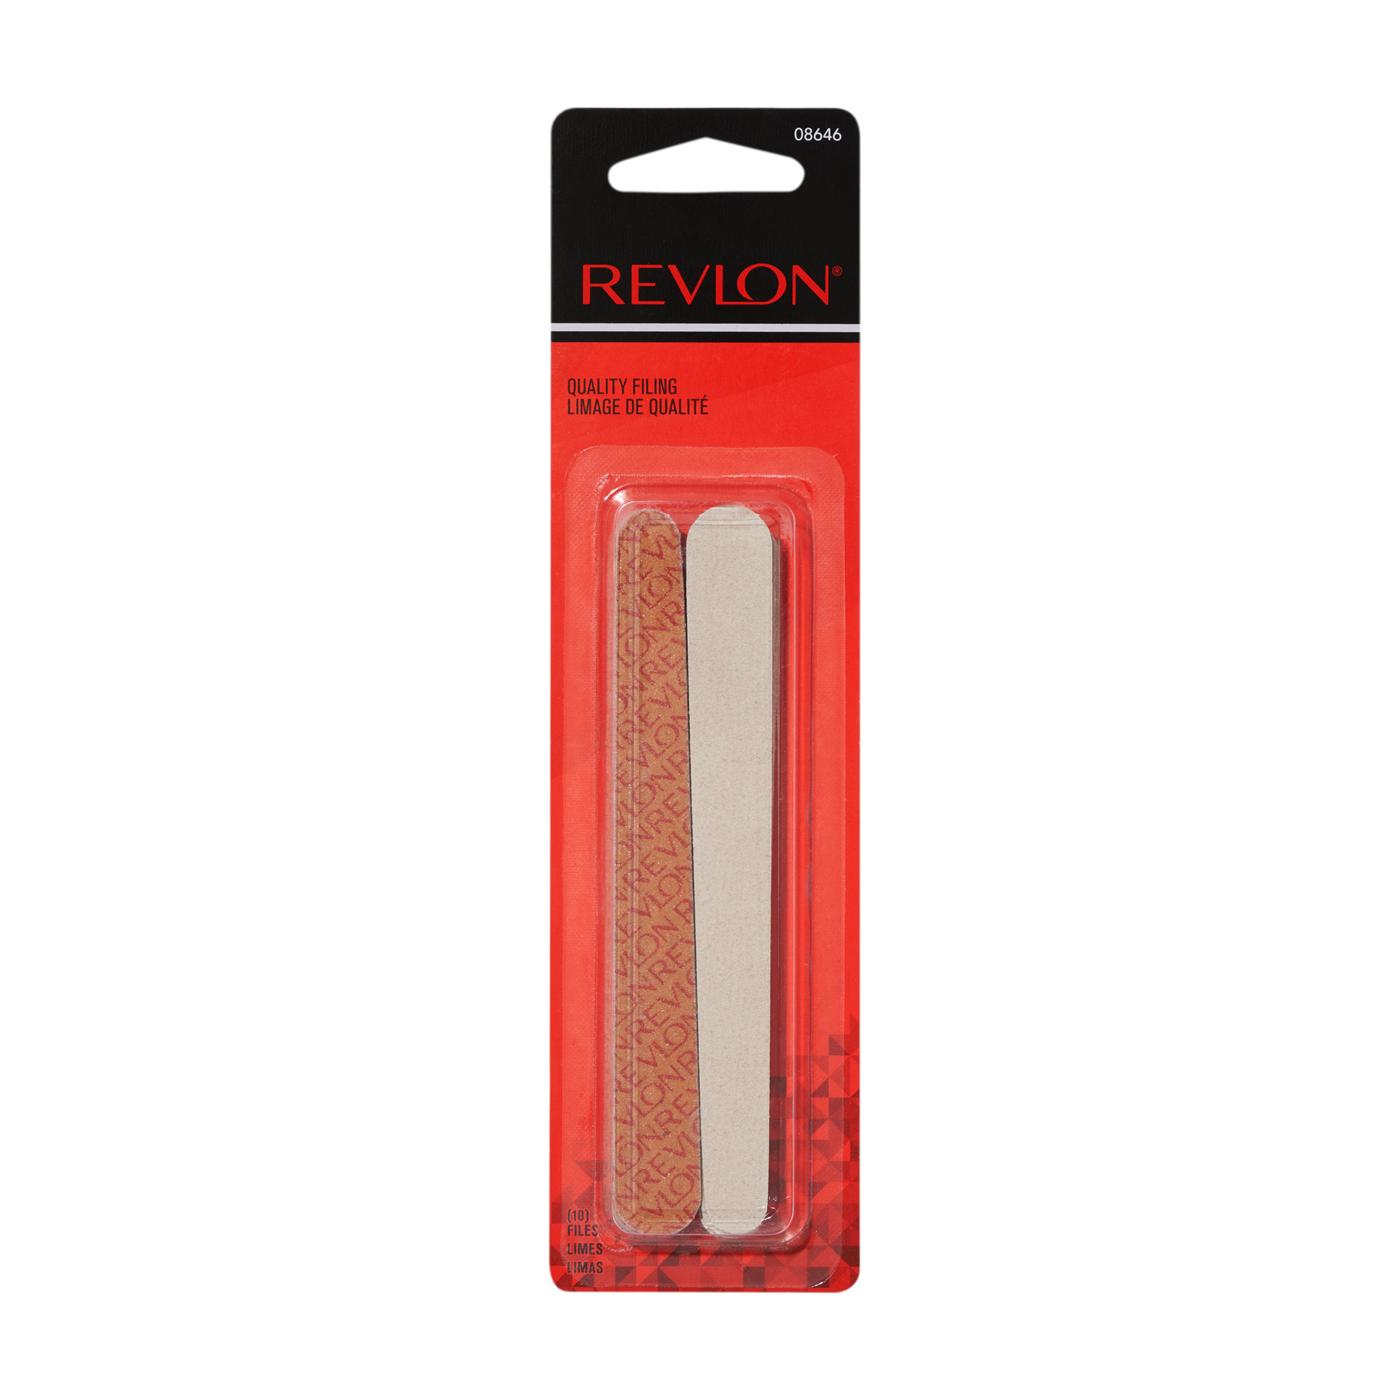 Revlon Compact Emery Boards; image 1 of 5